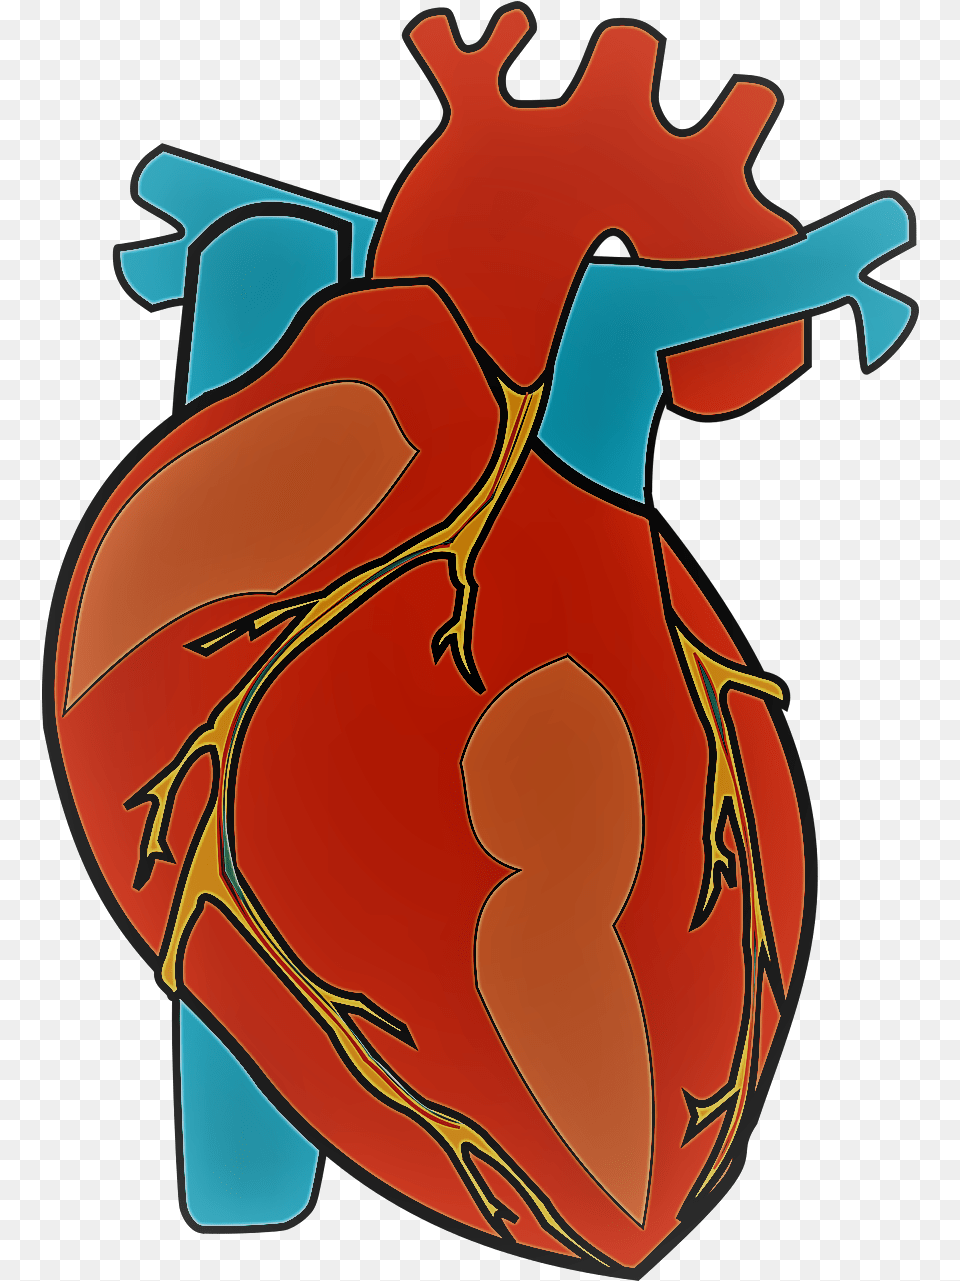 Human Heart Clipart Heart Anatomy, Dynamite, Weapon Free Transparent Png